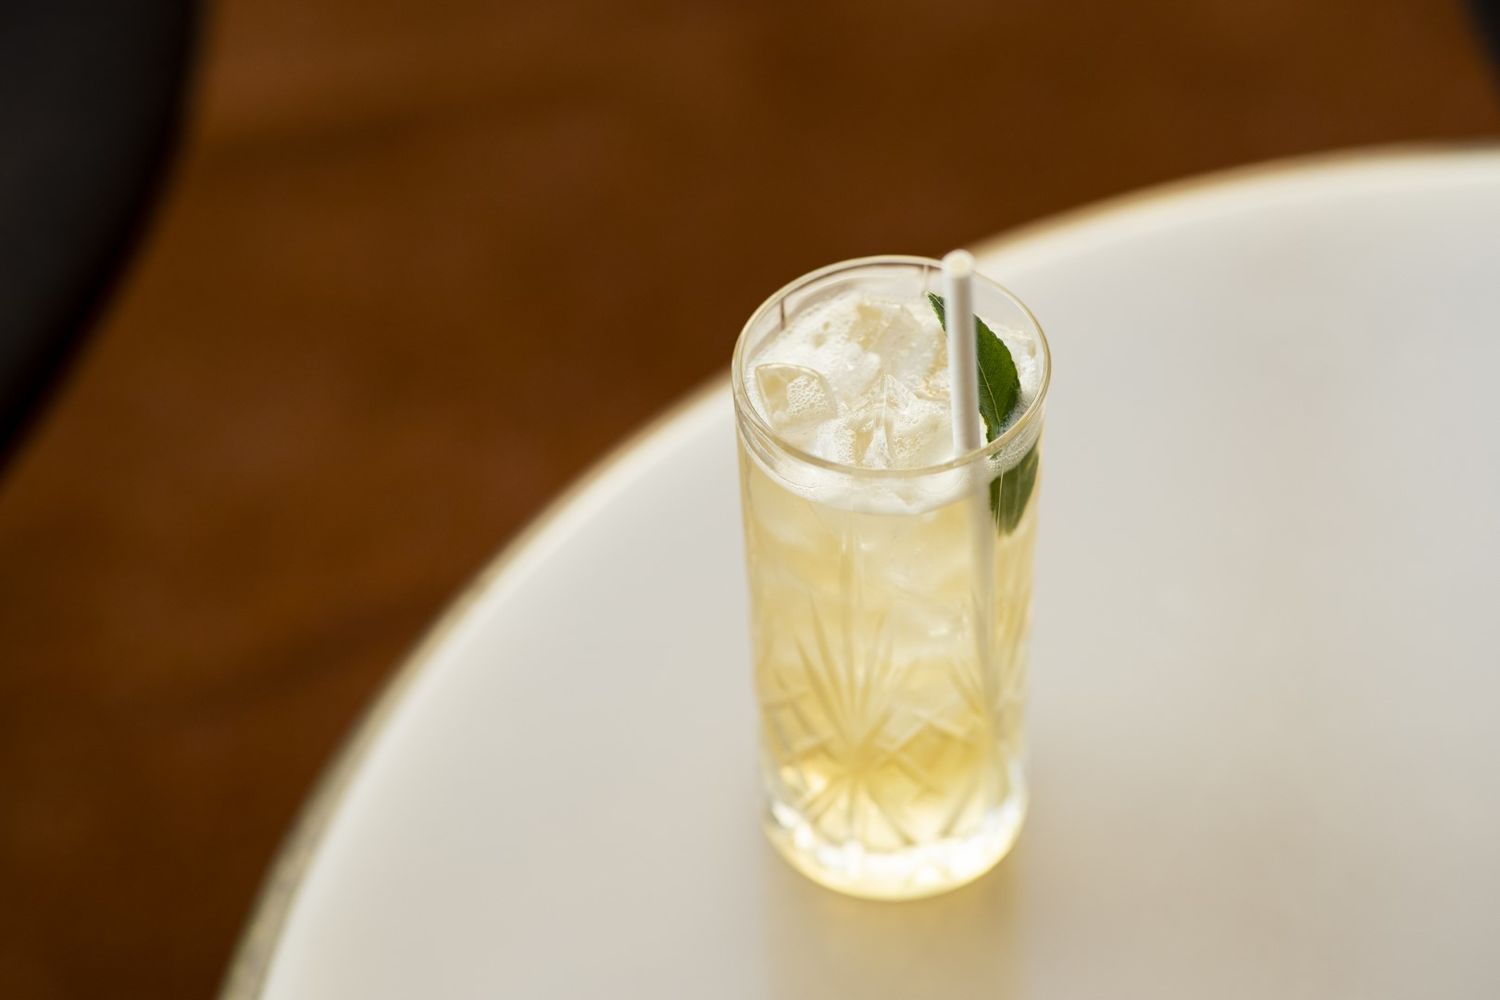 The launch event took place at Bennelong restaurant in Sydney, where guests sampled a welcome cocktail...